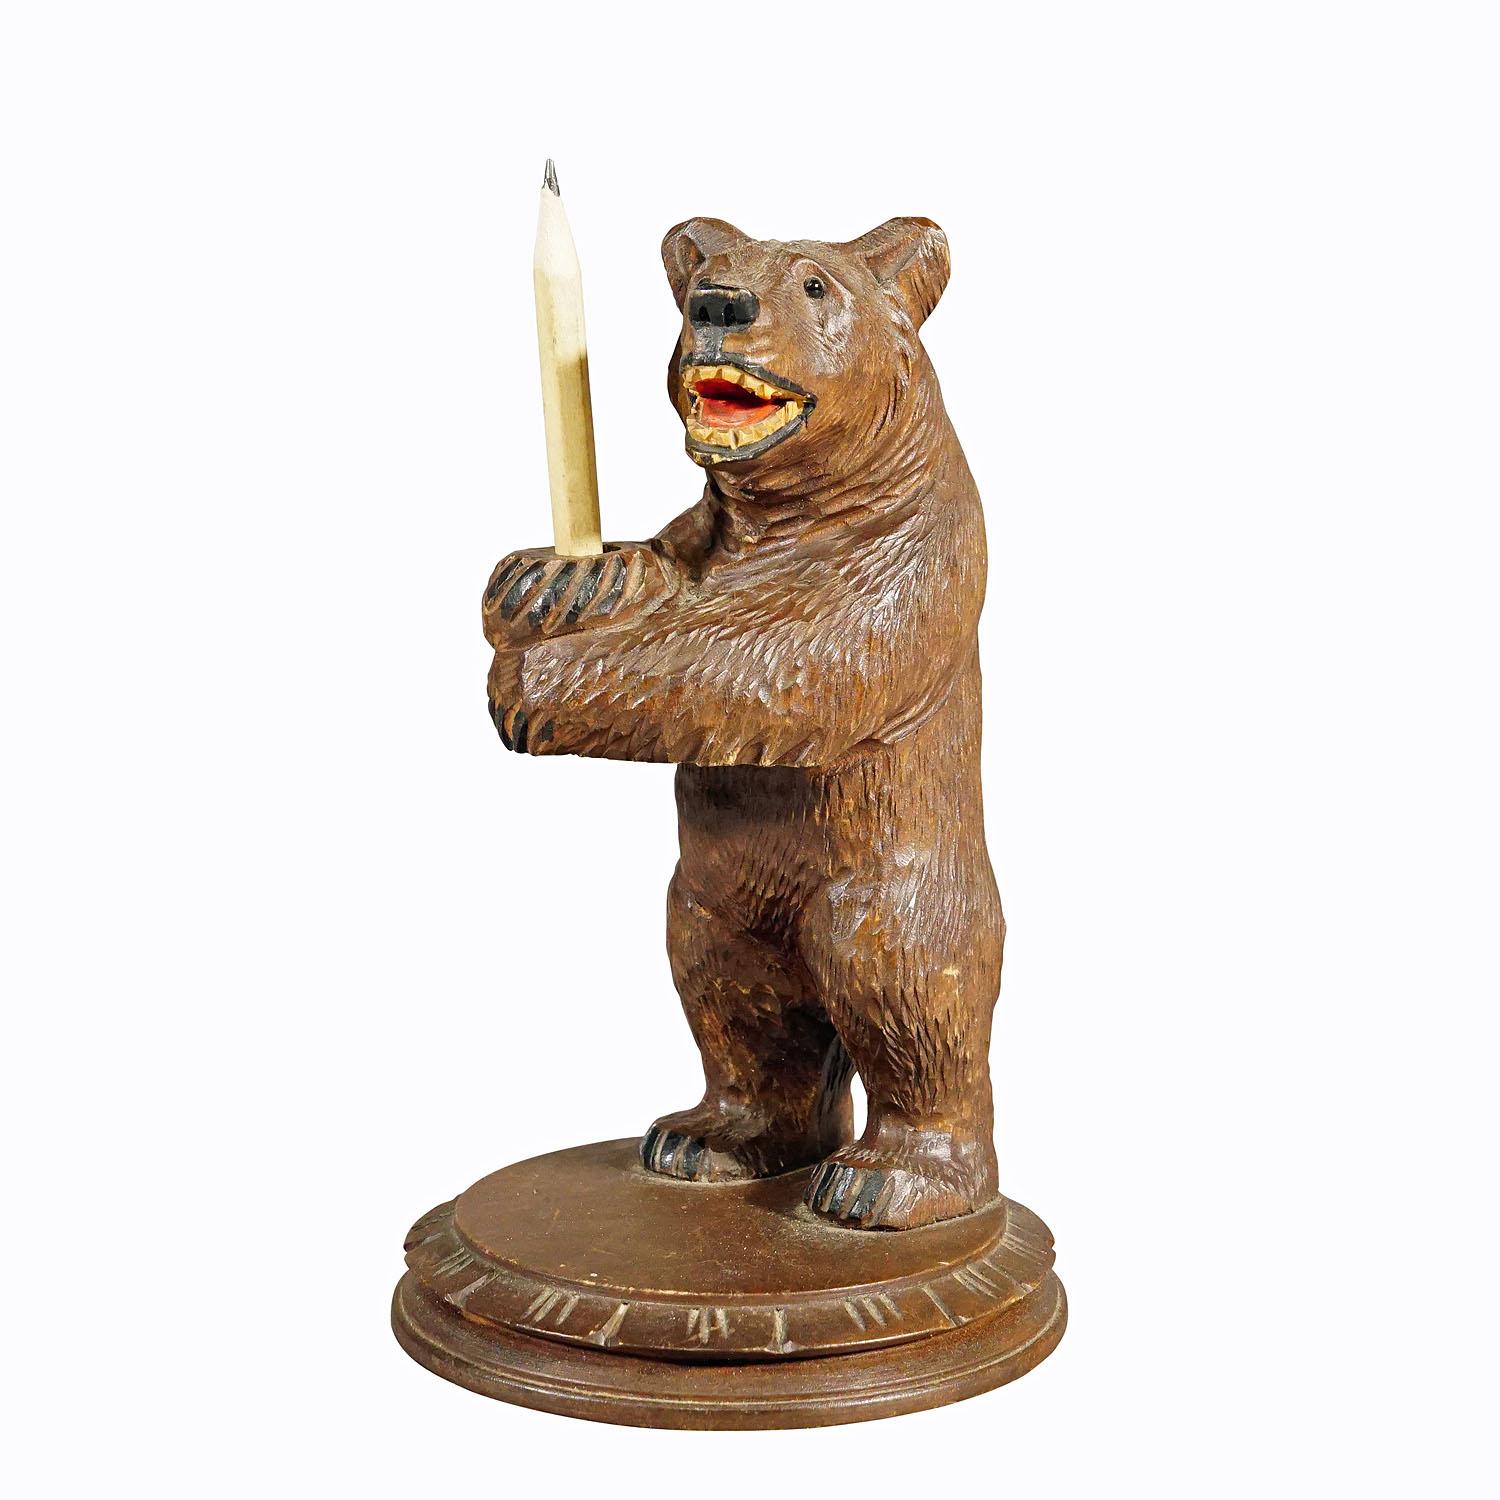 Vintage wooden bear pencil holder hand carved in Brienz circa 1930s.

A vintage statue of a Black Forest bear holding a pencil. Made of lindenwood, finely hand carved with naturalistic details in Brienz, Switzerland ca. 1930s. An authentic example